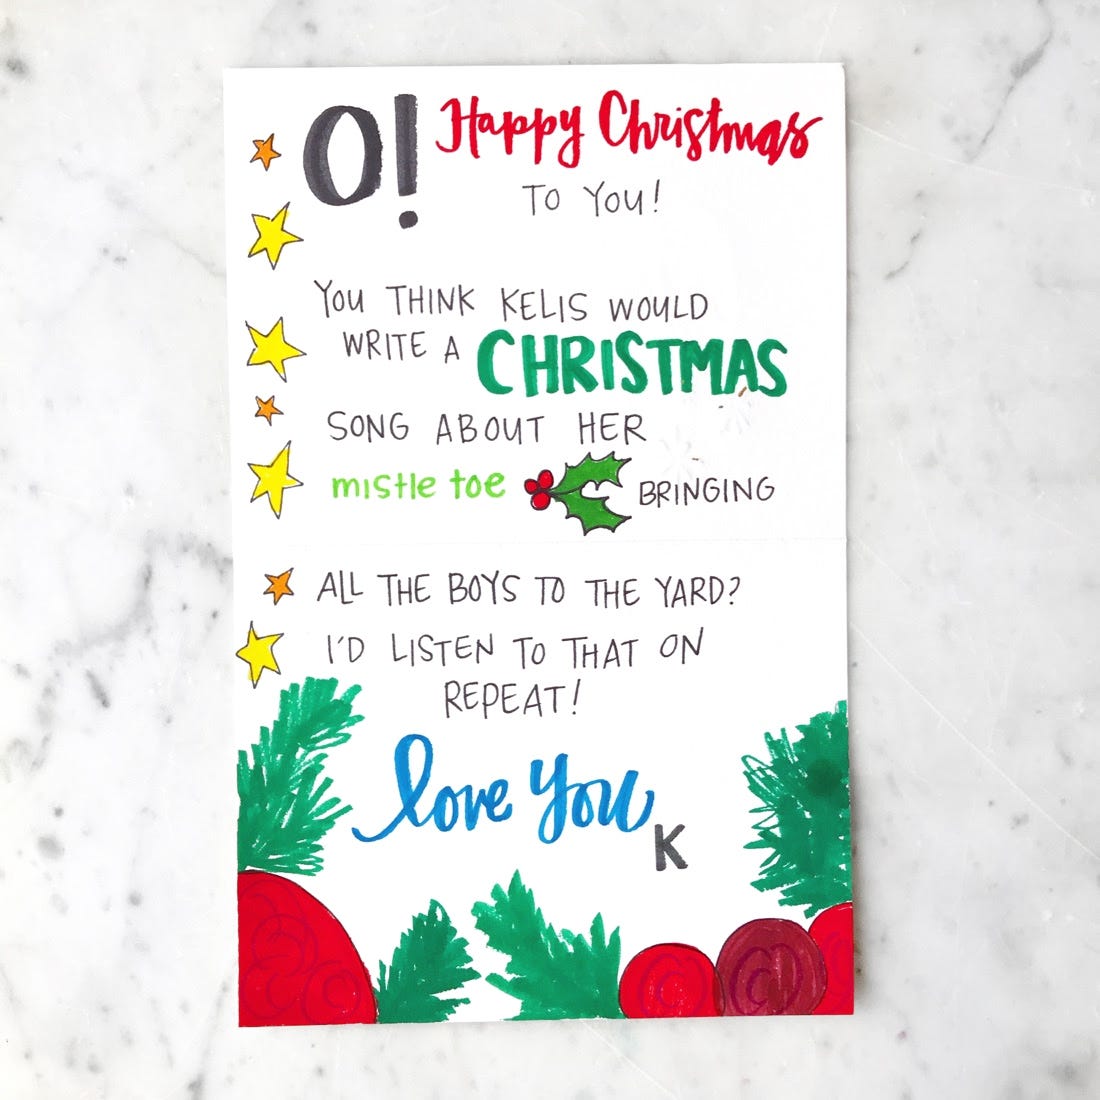 What to Write in Your Holiday Cards  by Punkpost  Punkpost  Medium